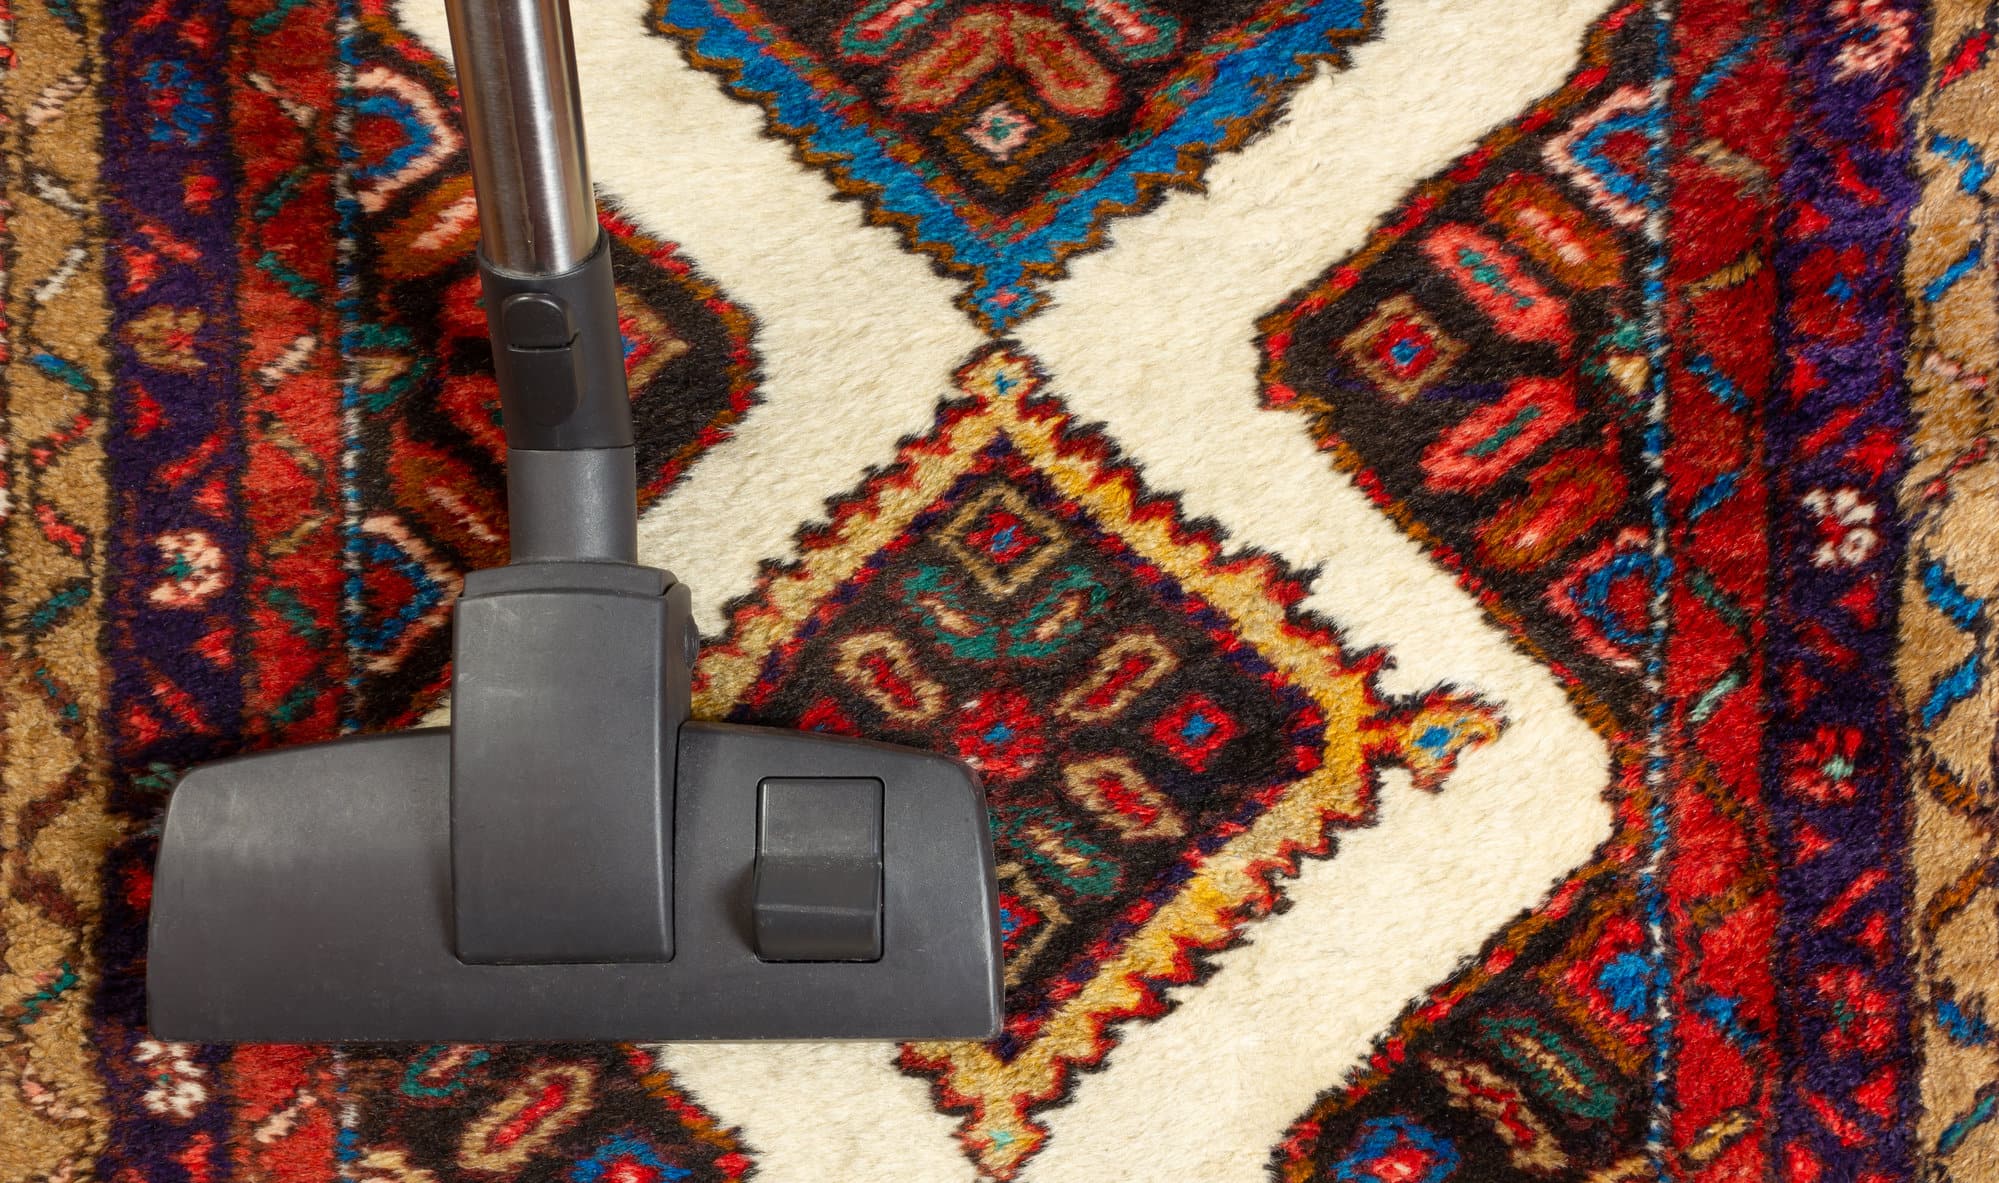 Cleaning & Care of Your Oriental Rugs